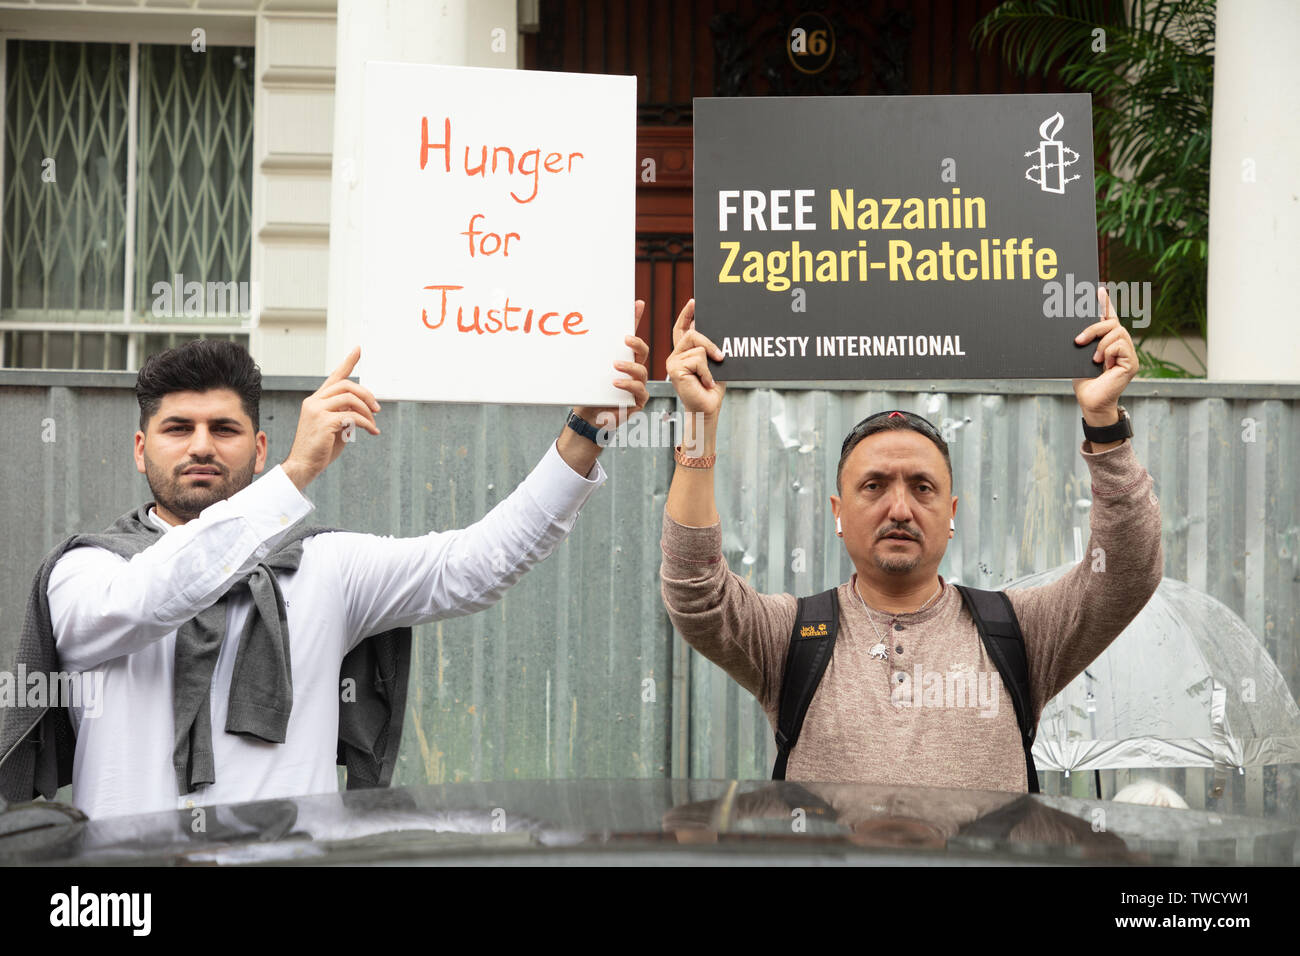 London, UK. 19th June 2019. Hunger strike: Supporters of Richard Ratcliffe who is on hunger strike in front of the Iranian embassy in London in protest of the detention of his wife Nazanin Zaghari in Iran over spying allegations. Credit: Joe Kuis / Alamy Stock Photo